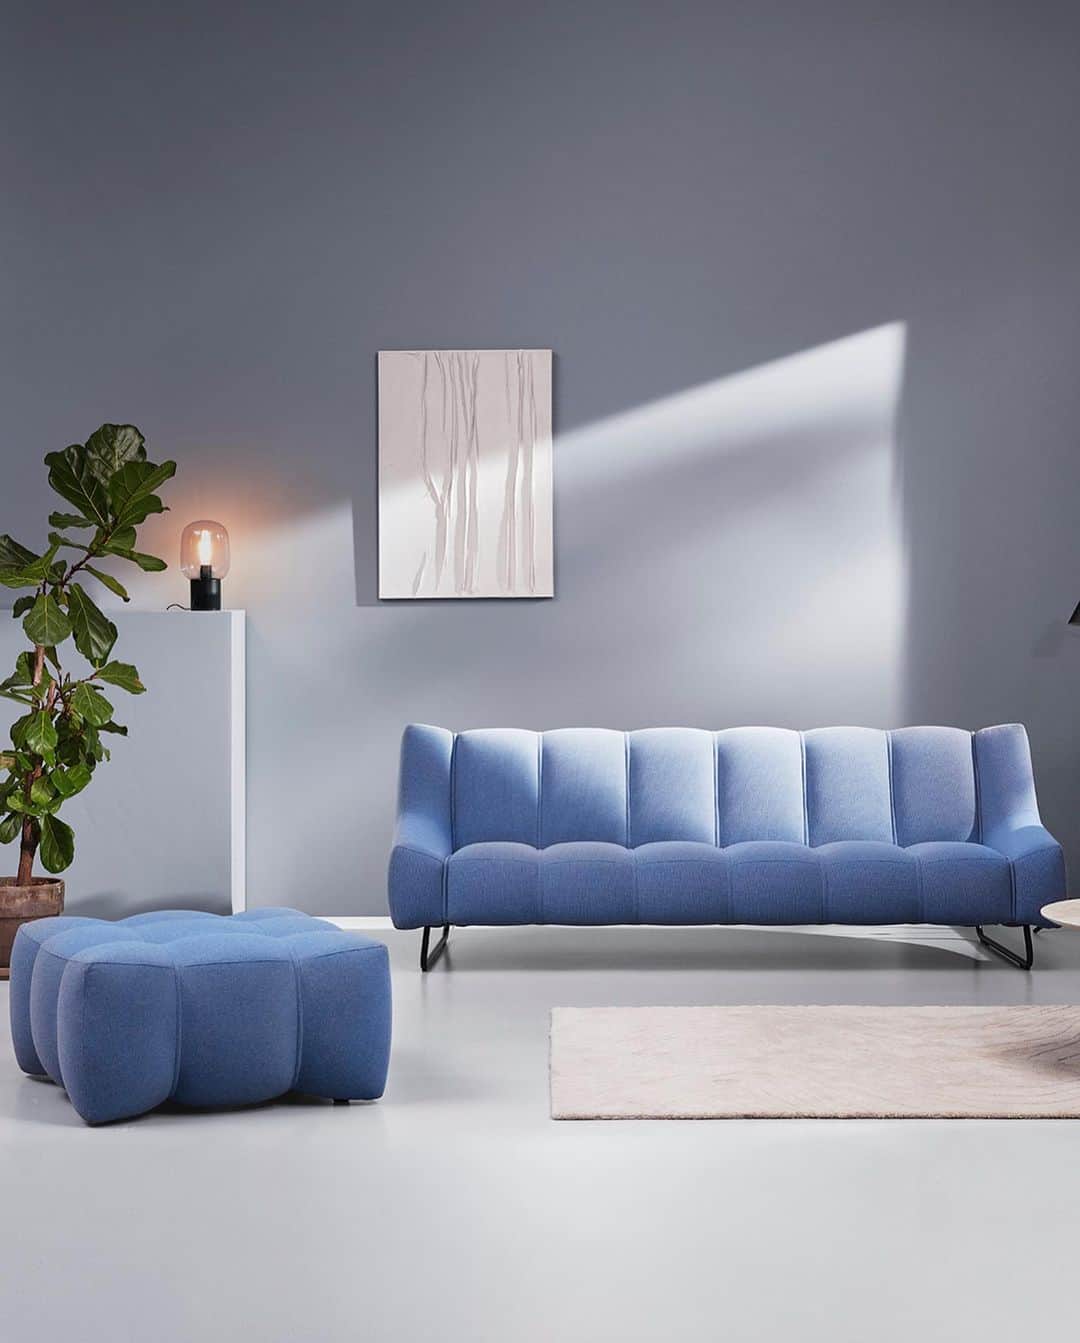 Design Milkのインスタグラム：「Inspired by the Japanese art of forging close bonds through binding with ropes, the Nawabari Collection by @big_builds + @boconcept_official reimagines shared spaces + brings people together. Designed by Jakob Lange, these sculptural organic shapes make a show-stopping statement in any setting. 🛋️ \\\ Check them out at the link in bio. 🔗」